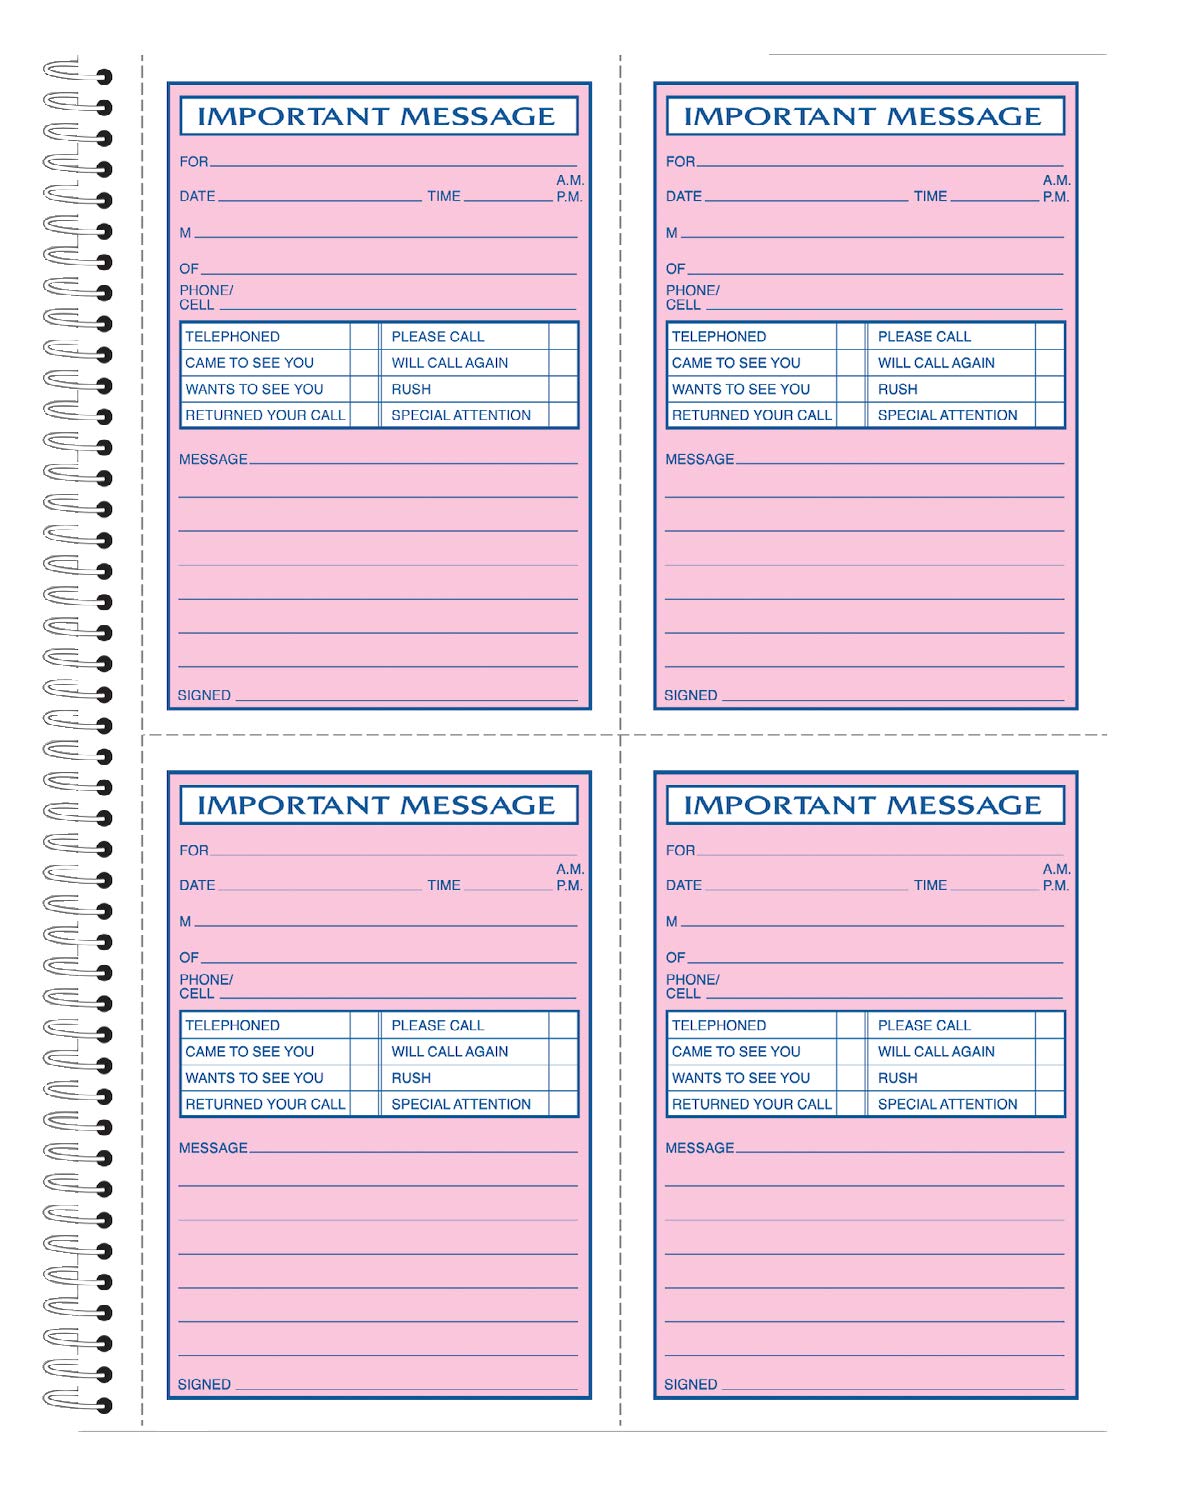 Adams Phone Message Book, 8.06 x 11 Inch, Spiral Bound, 2-Part, Carbonless, 4 Messages per Page, 400 Sets, White and Canary (S1187D)